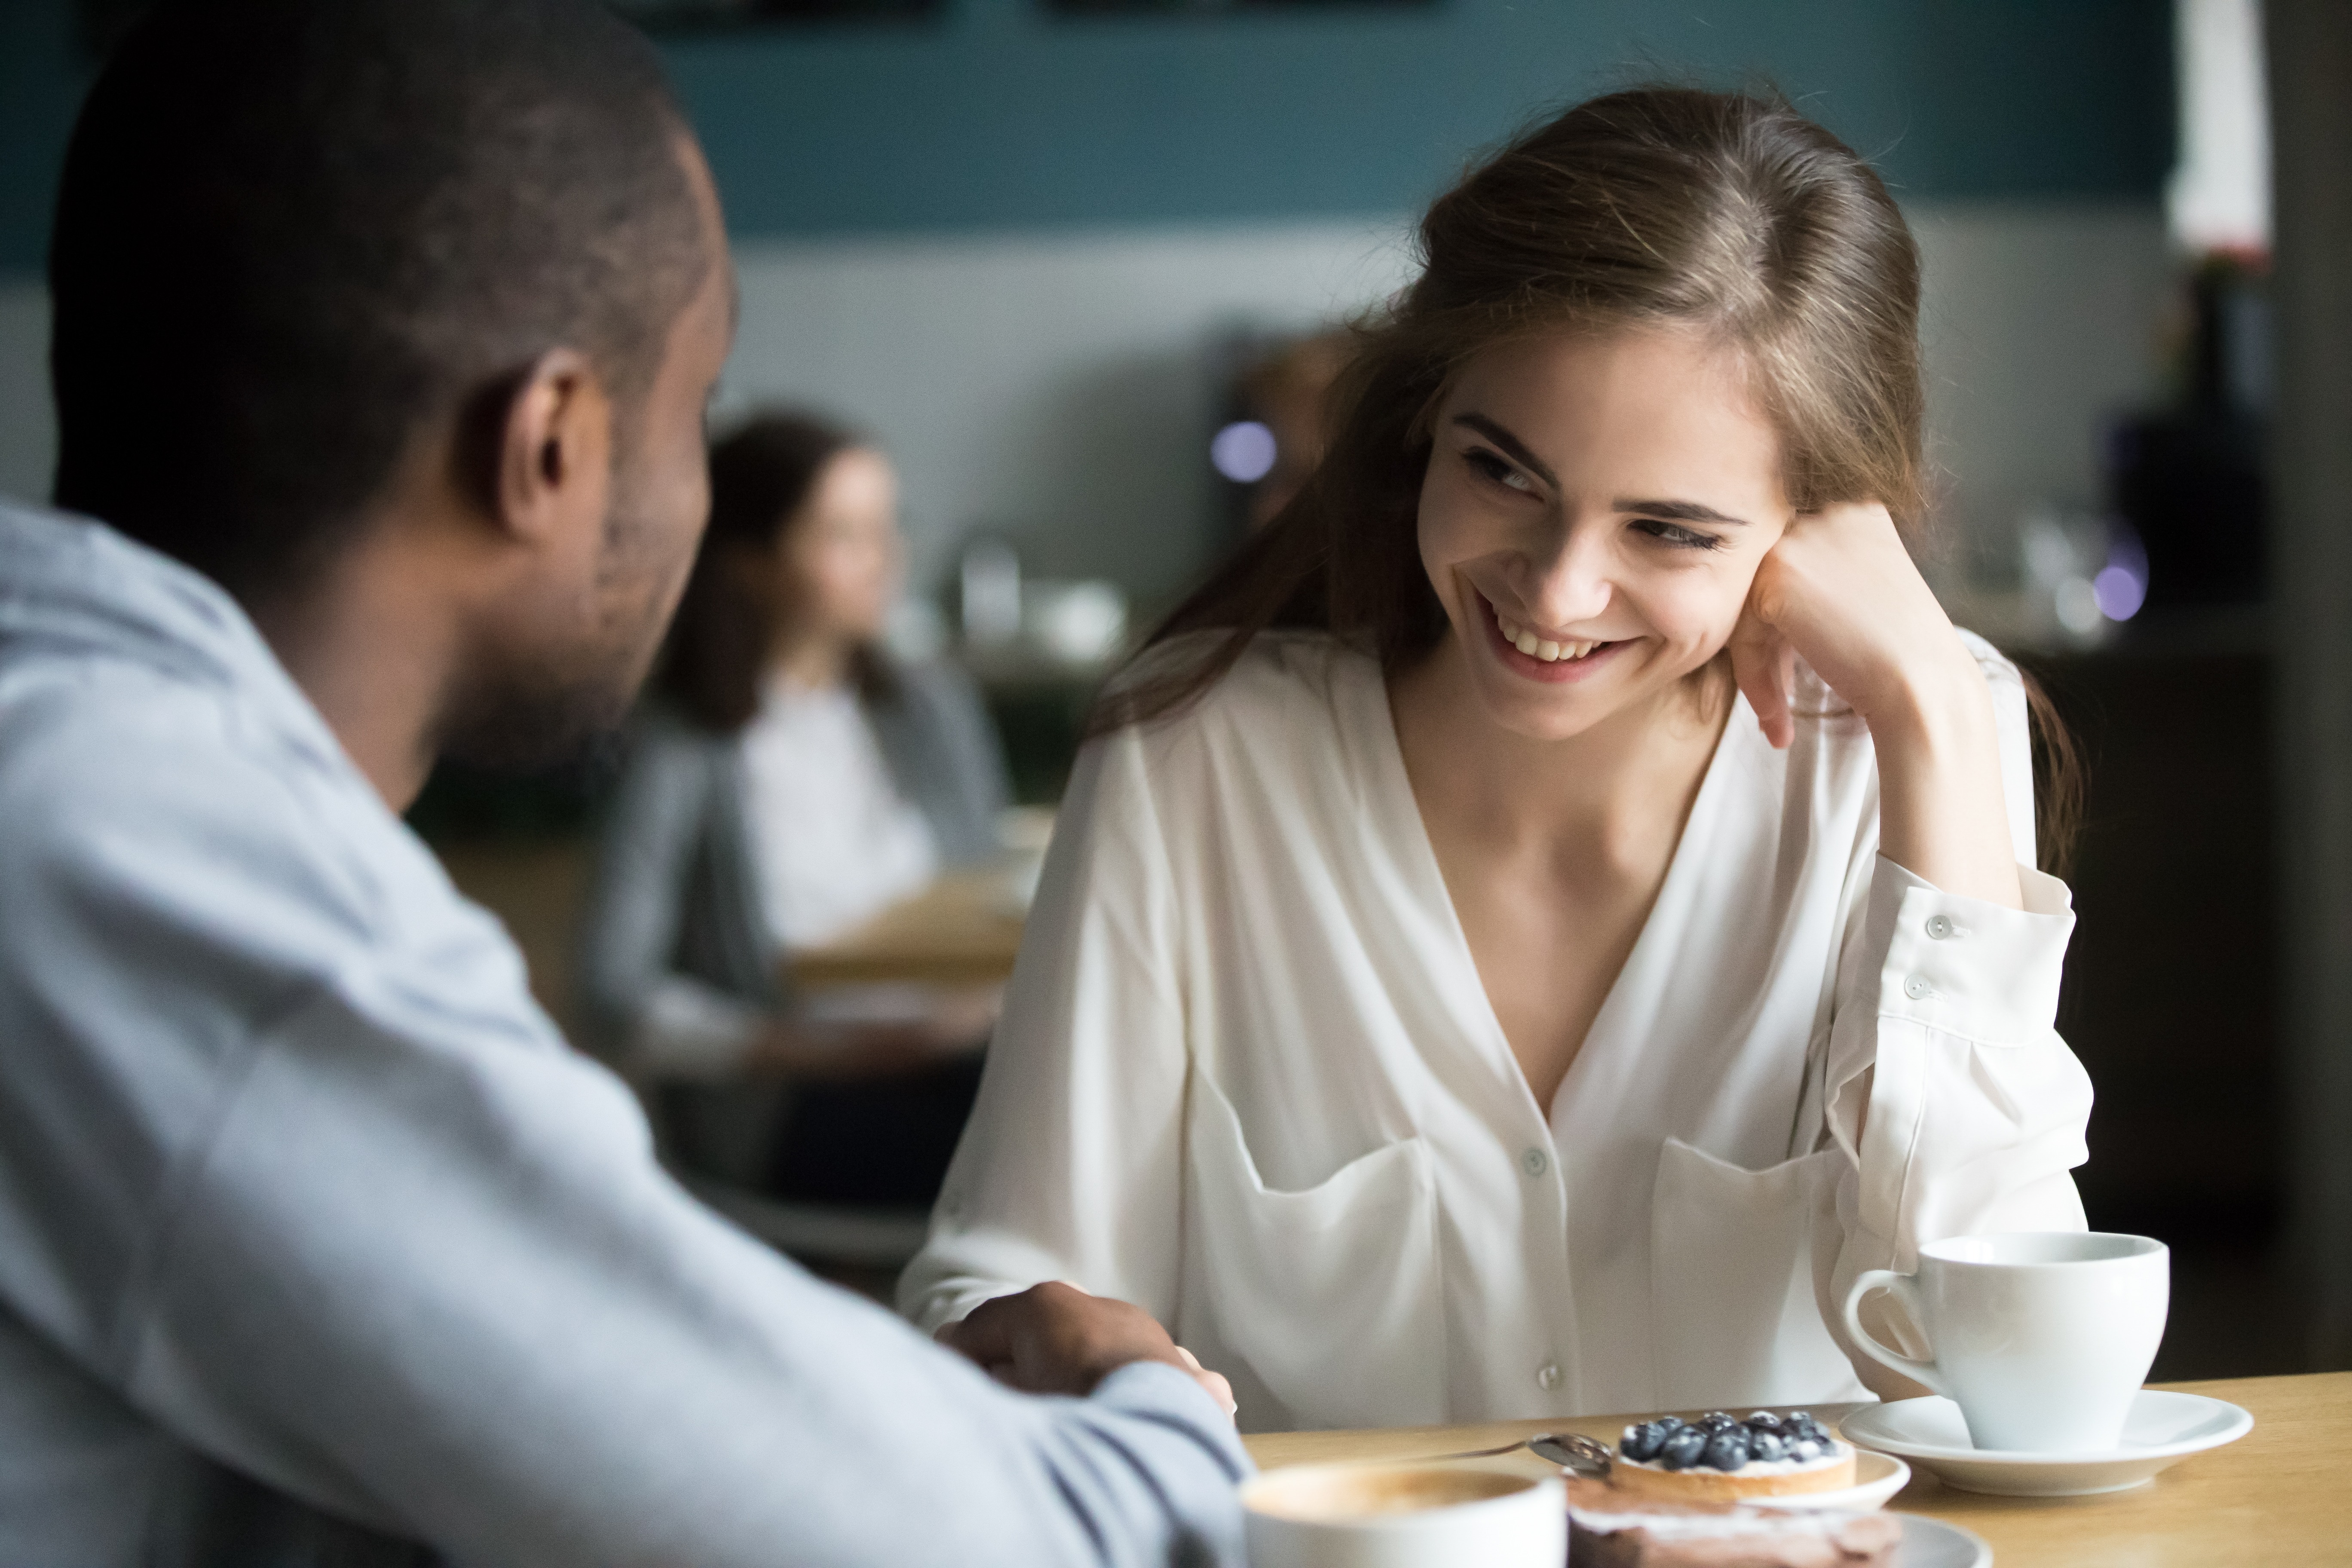 A happy couple flirting while on a date | Source: Shutterstock